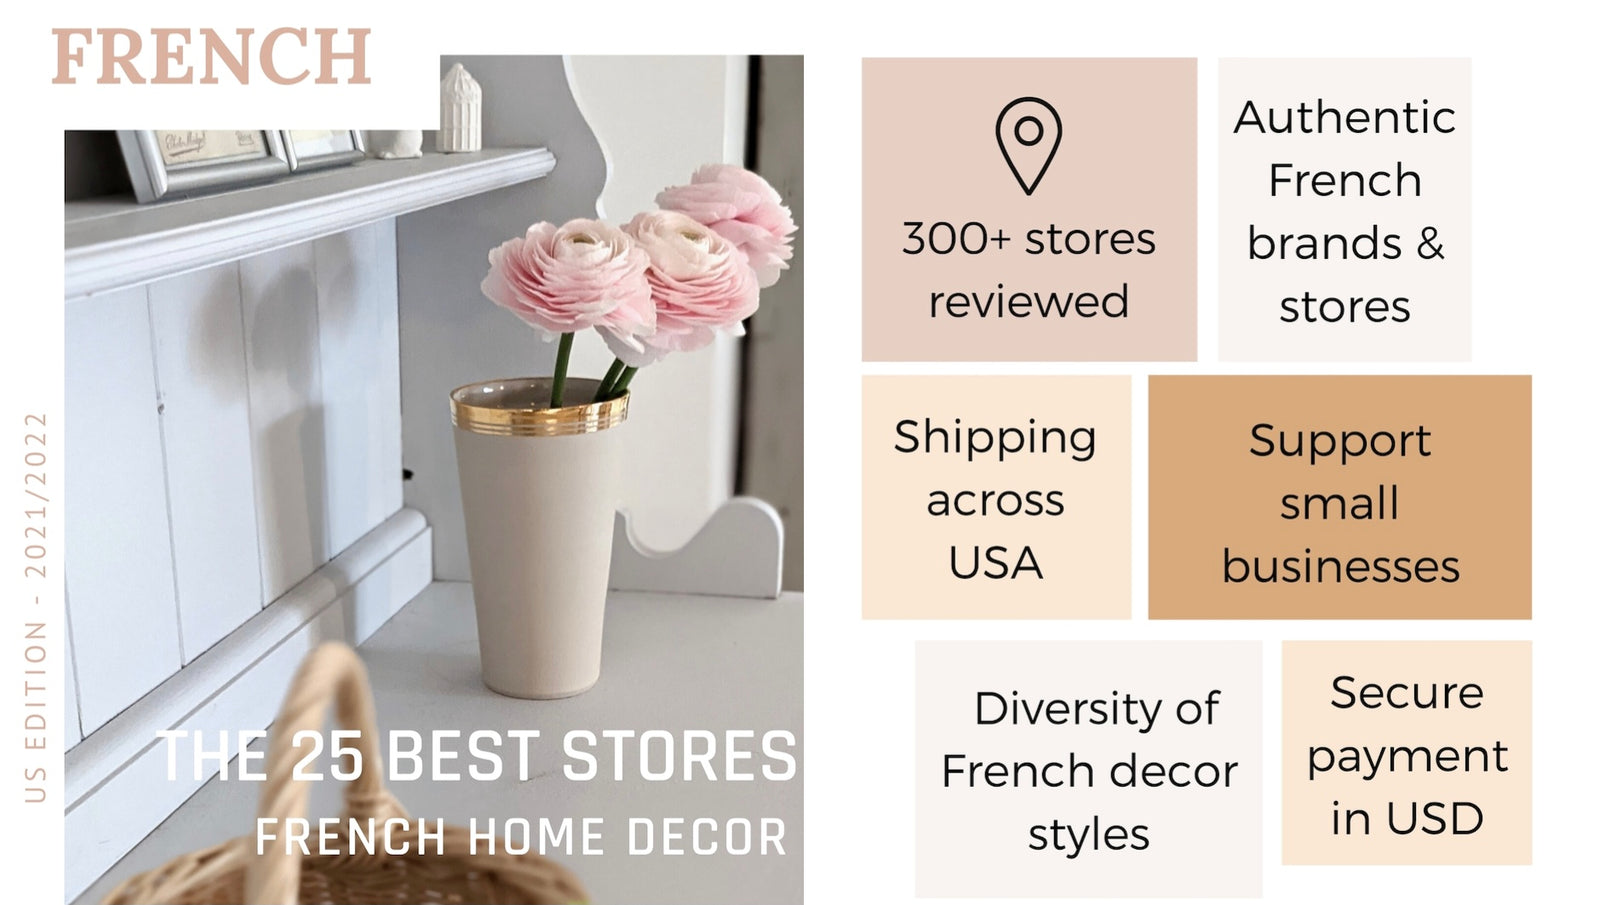 French Home Decor - The 25 Best Stores